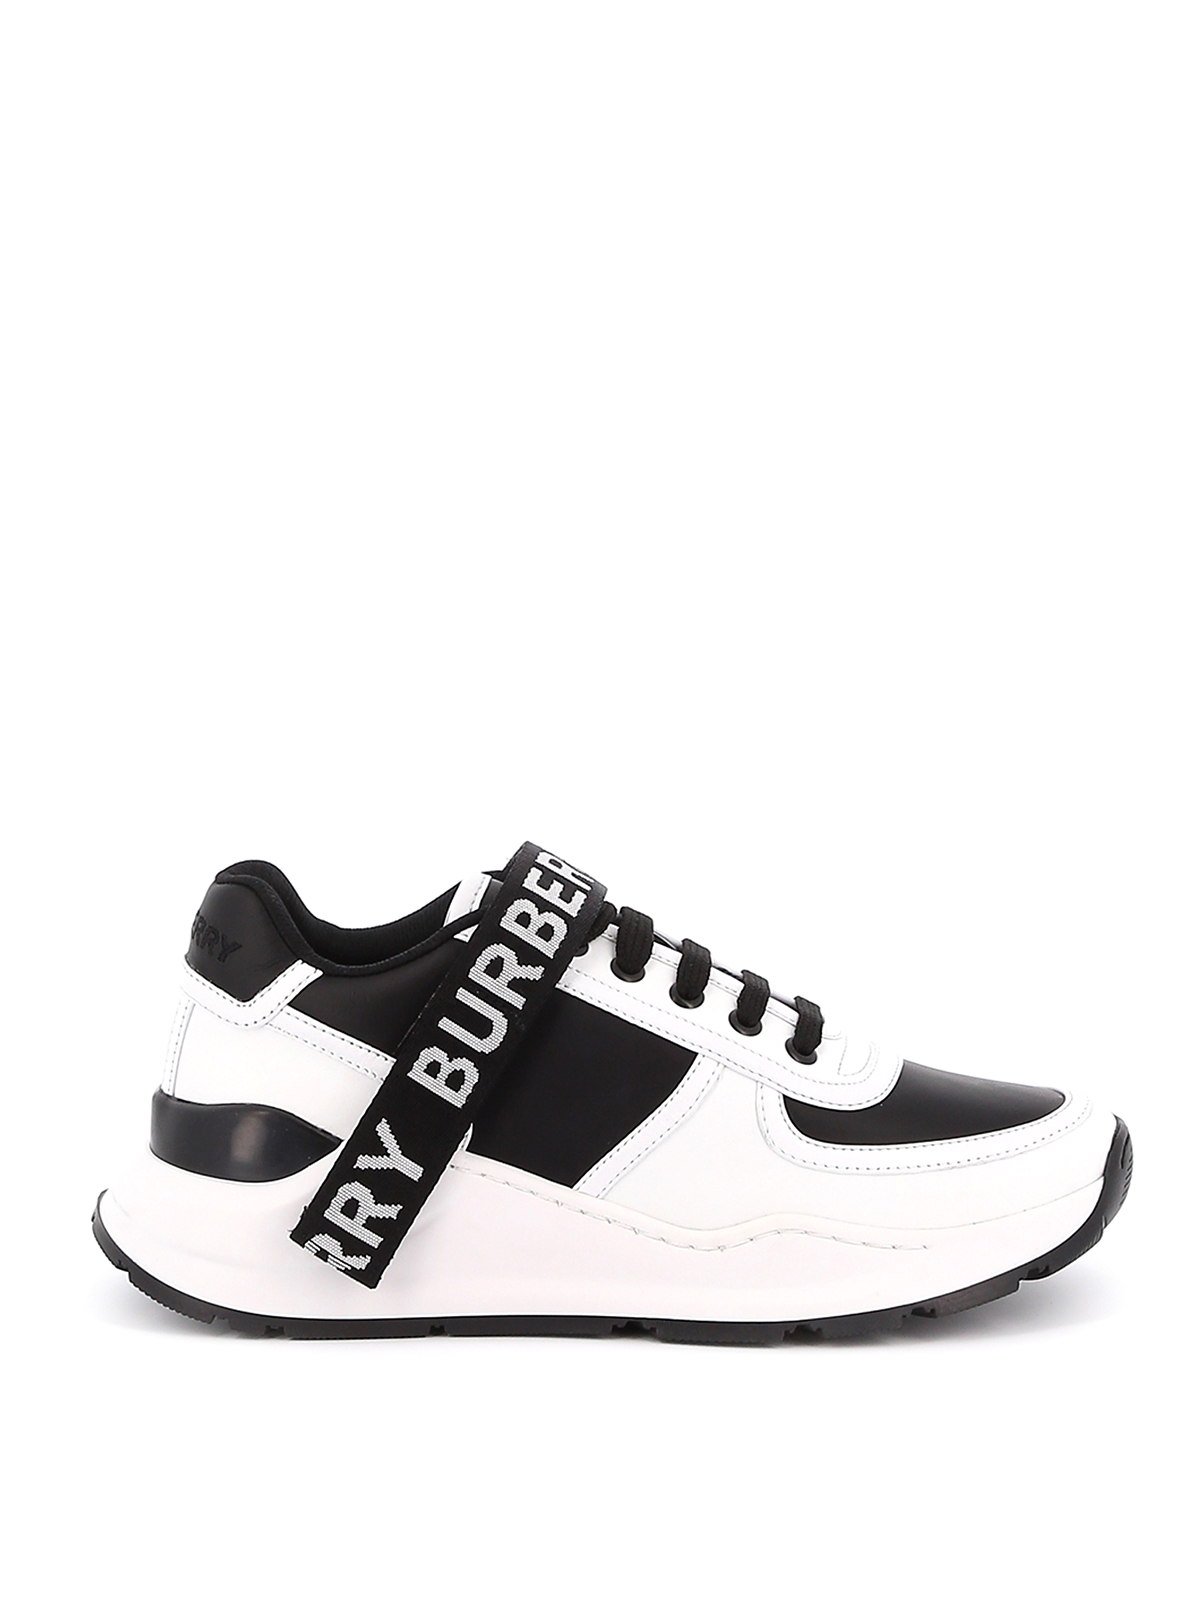 Trainers Burberry - Two-tone leather and nylon sneakers - 8011531